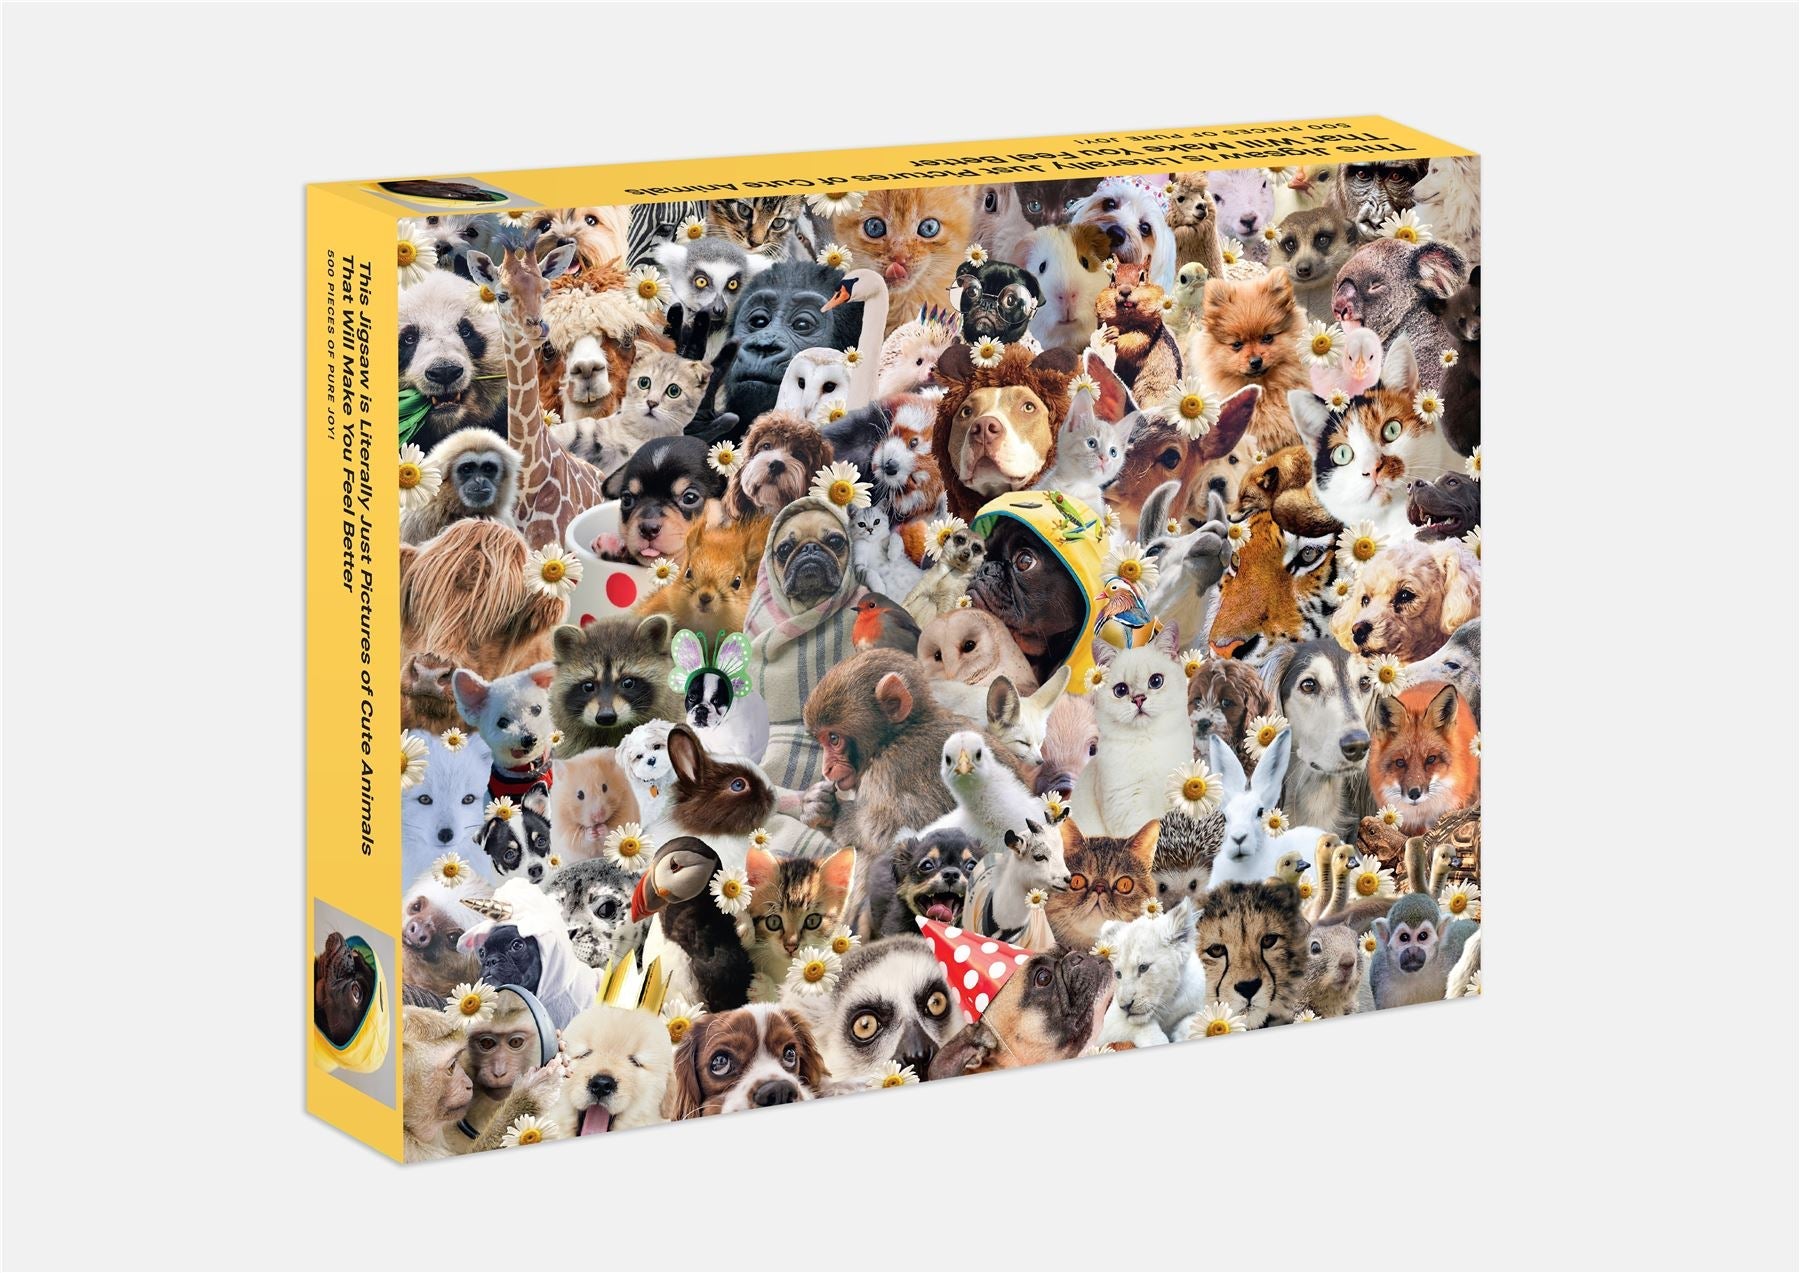 This Jigsaw is Literally Just Pictures of Cute Animals That Will Make You Feel Better, 500 Piece Jigsaw Puzzle